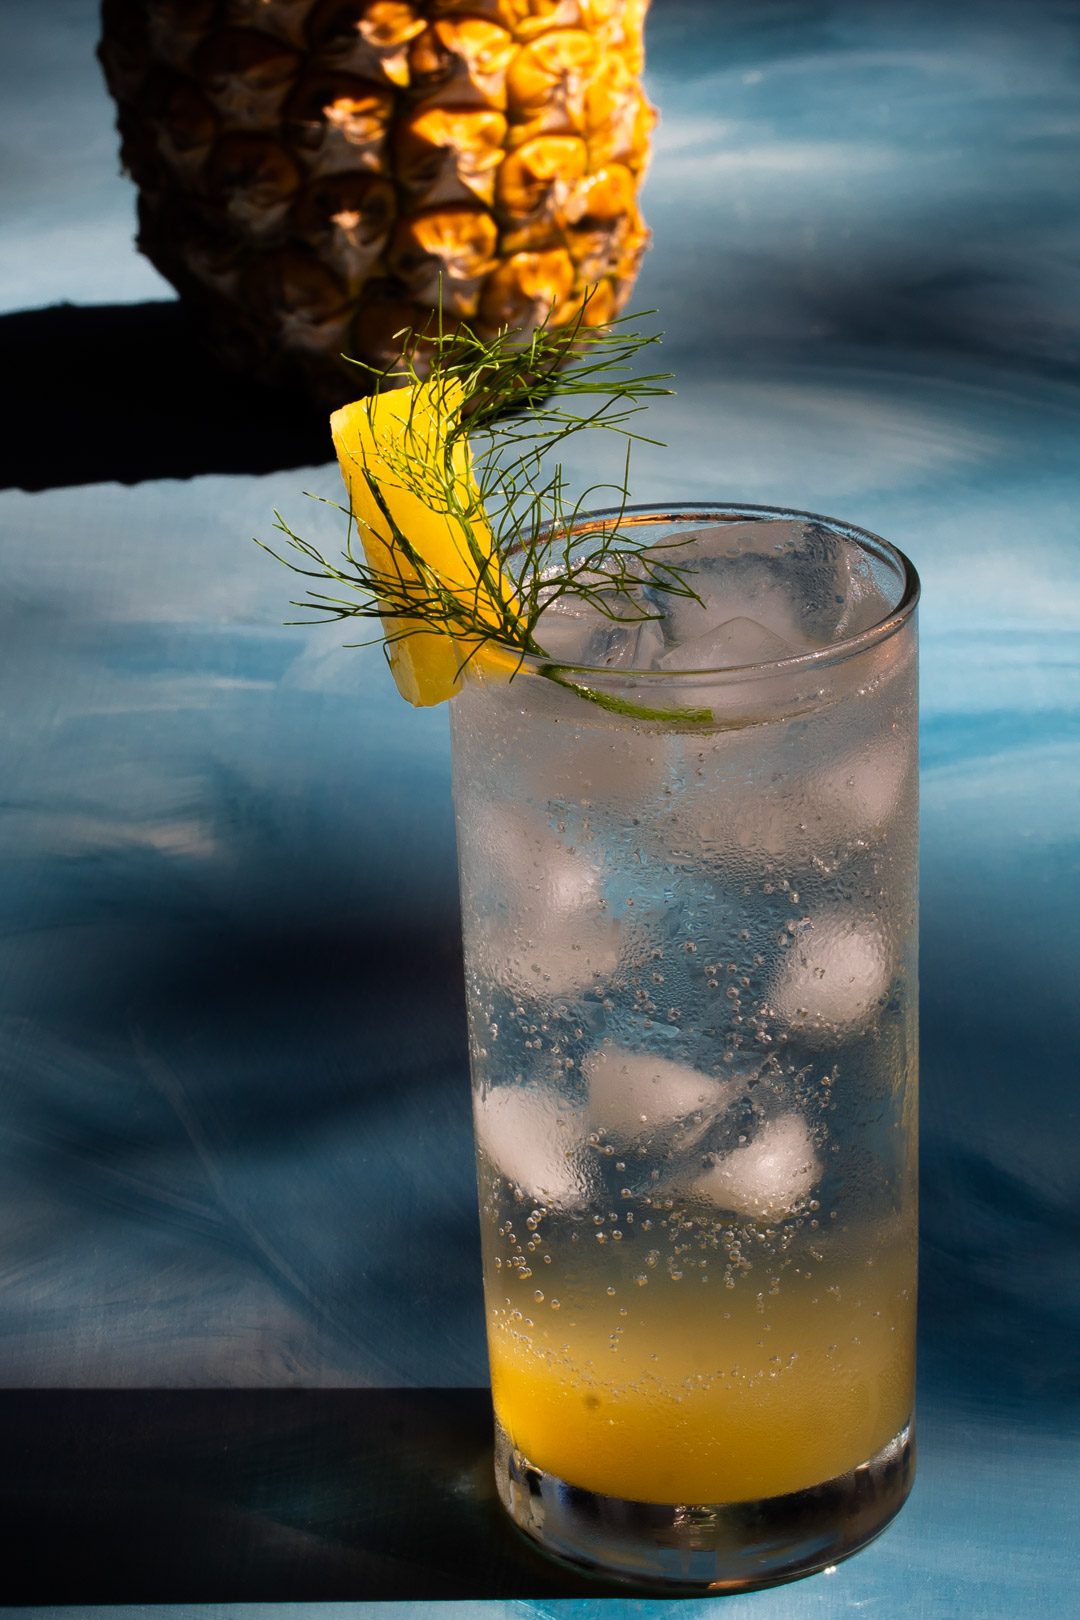 pineapple fennel shrub syrup from a 45 degree angle with pineapple in the background